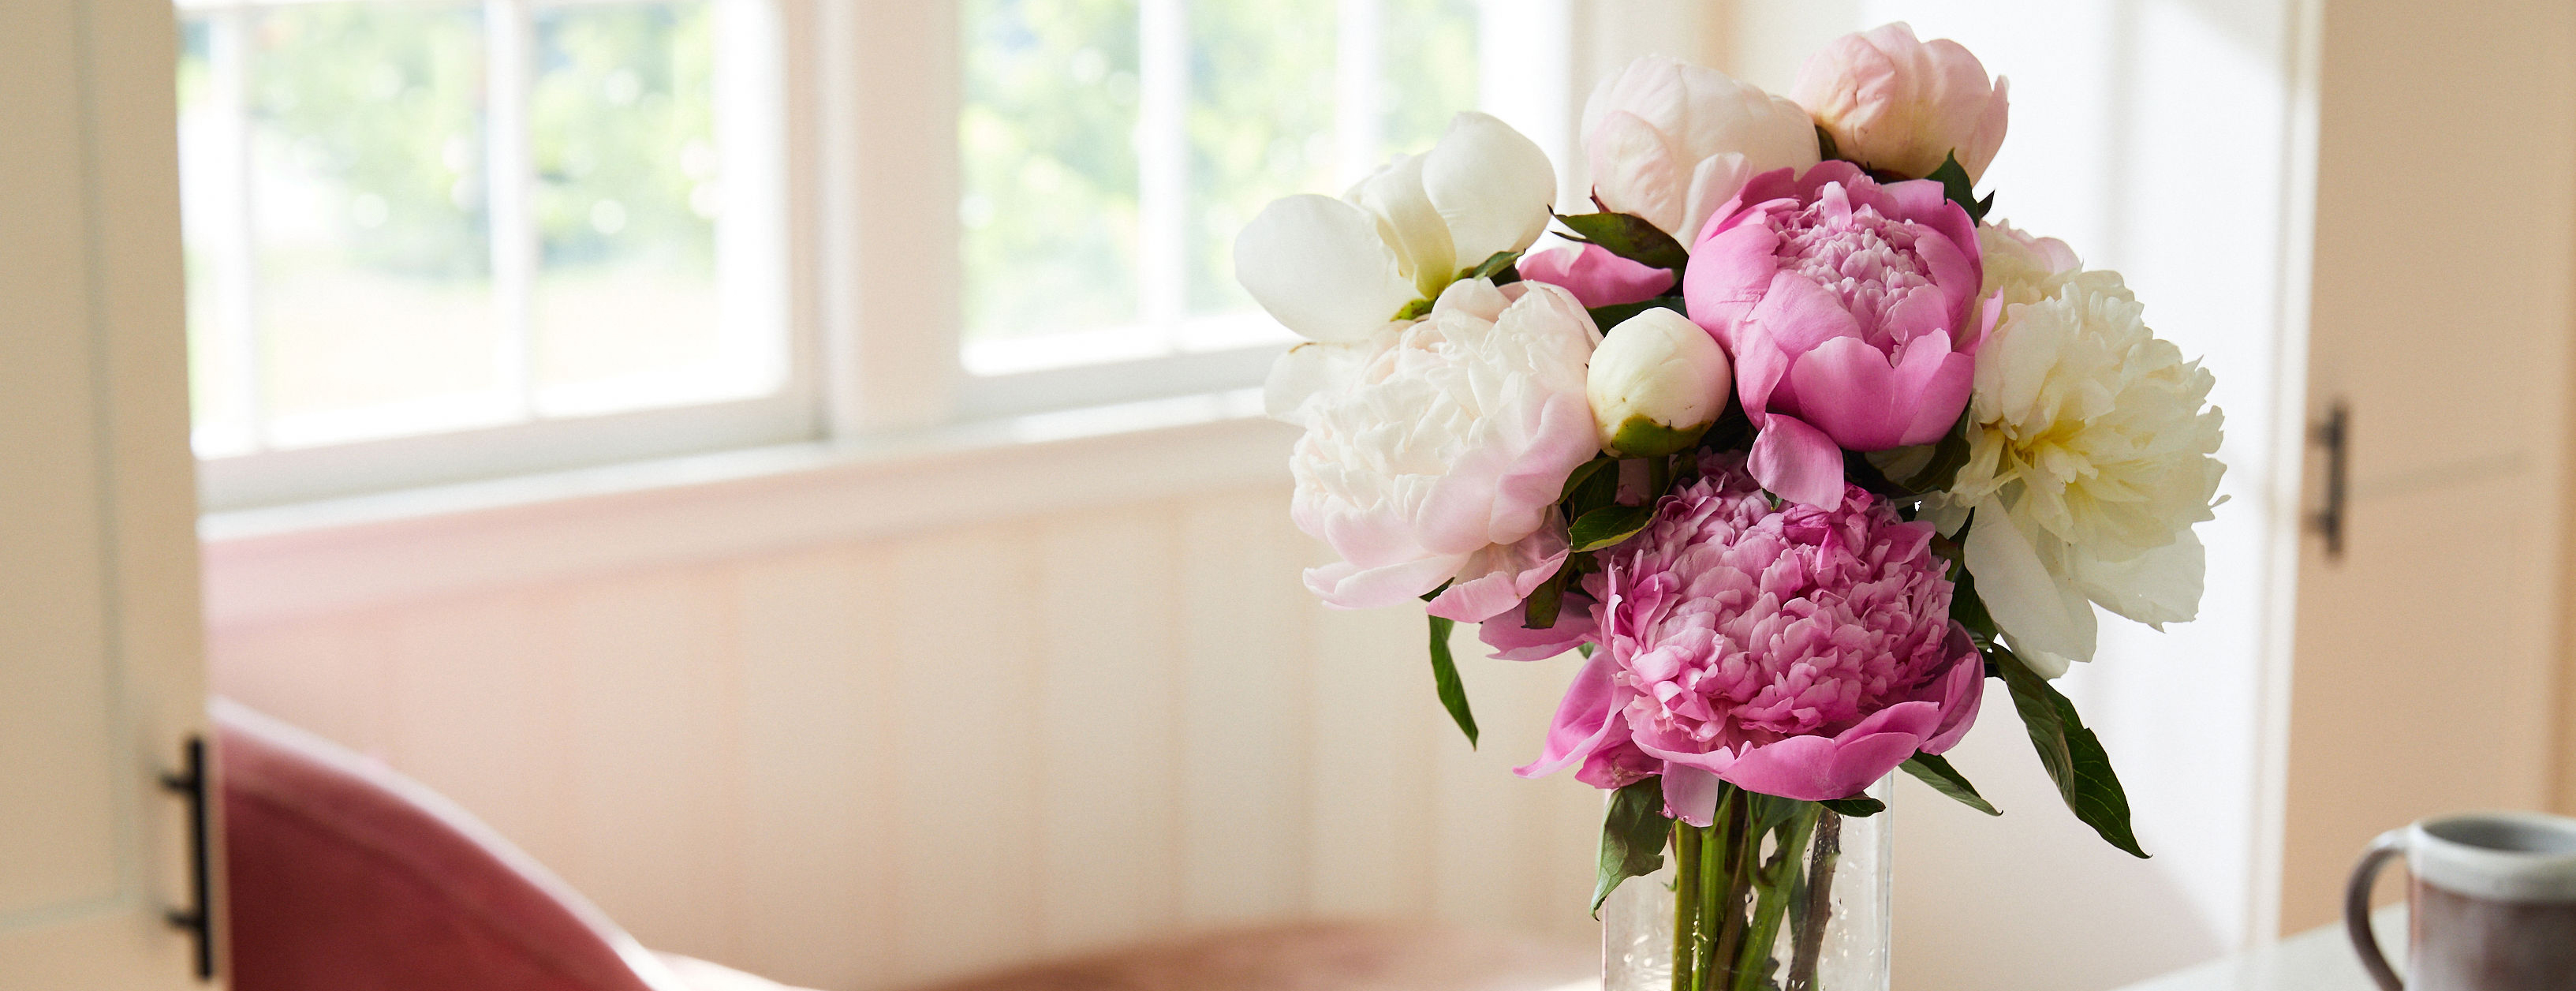 Close up of a pink and white peony bouquet on a table